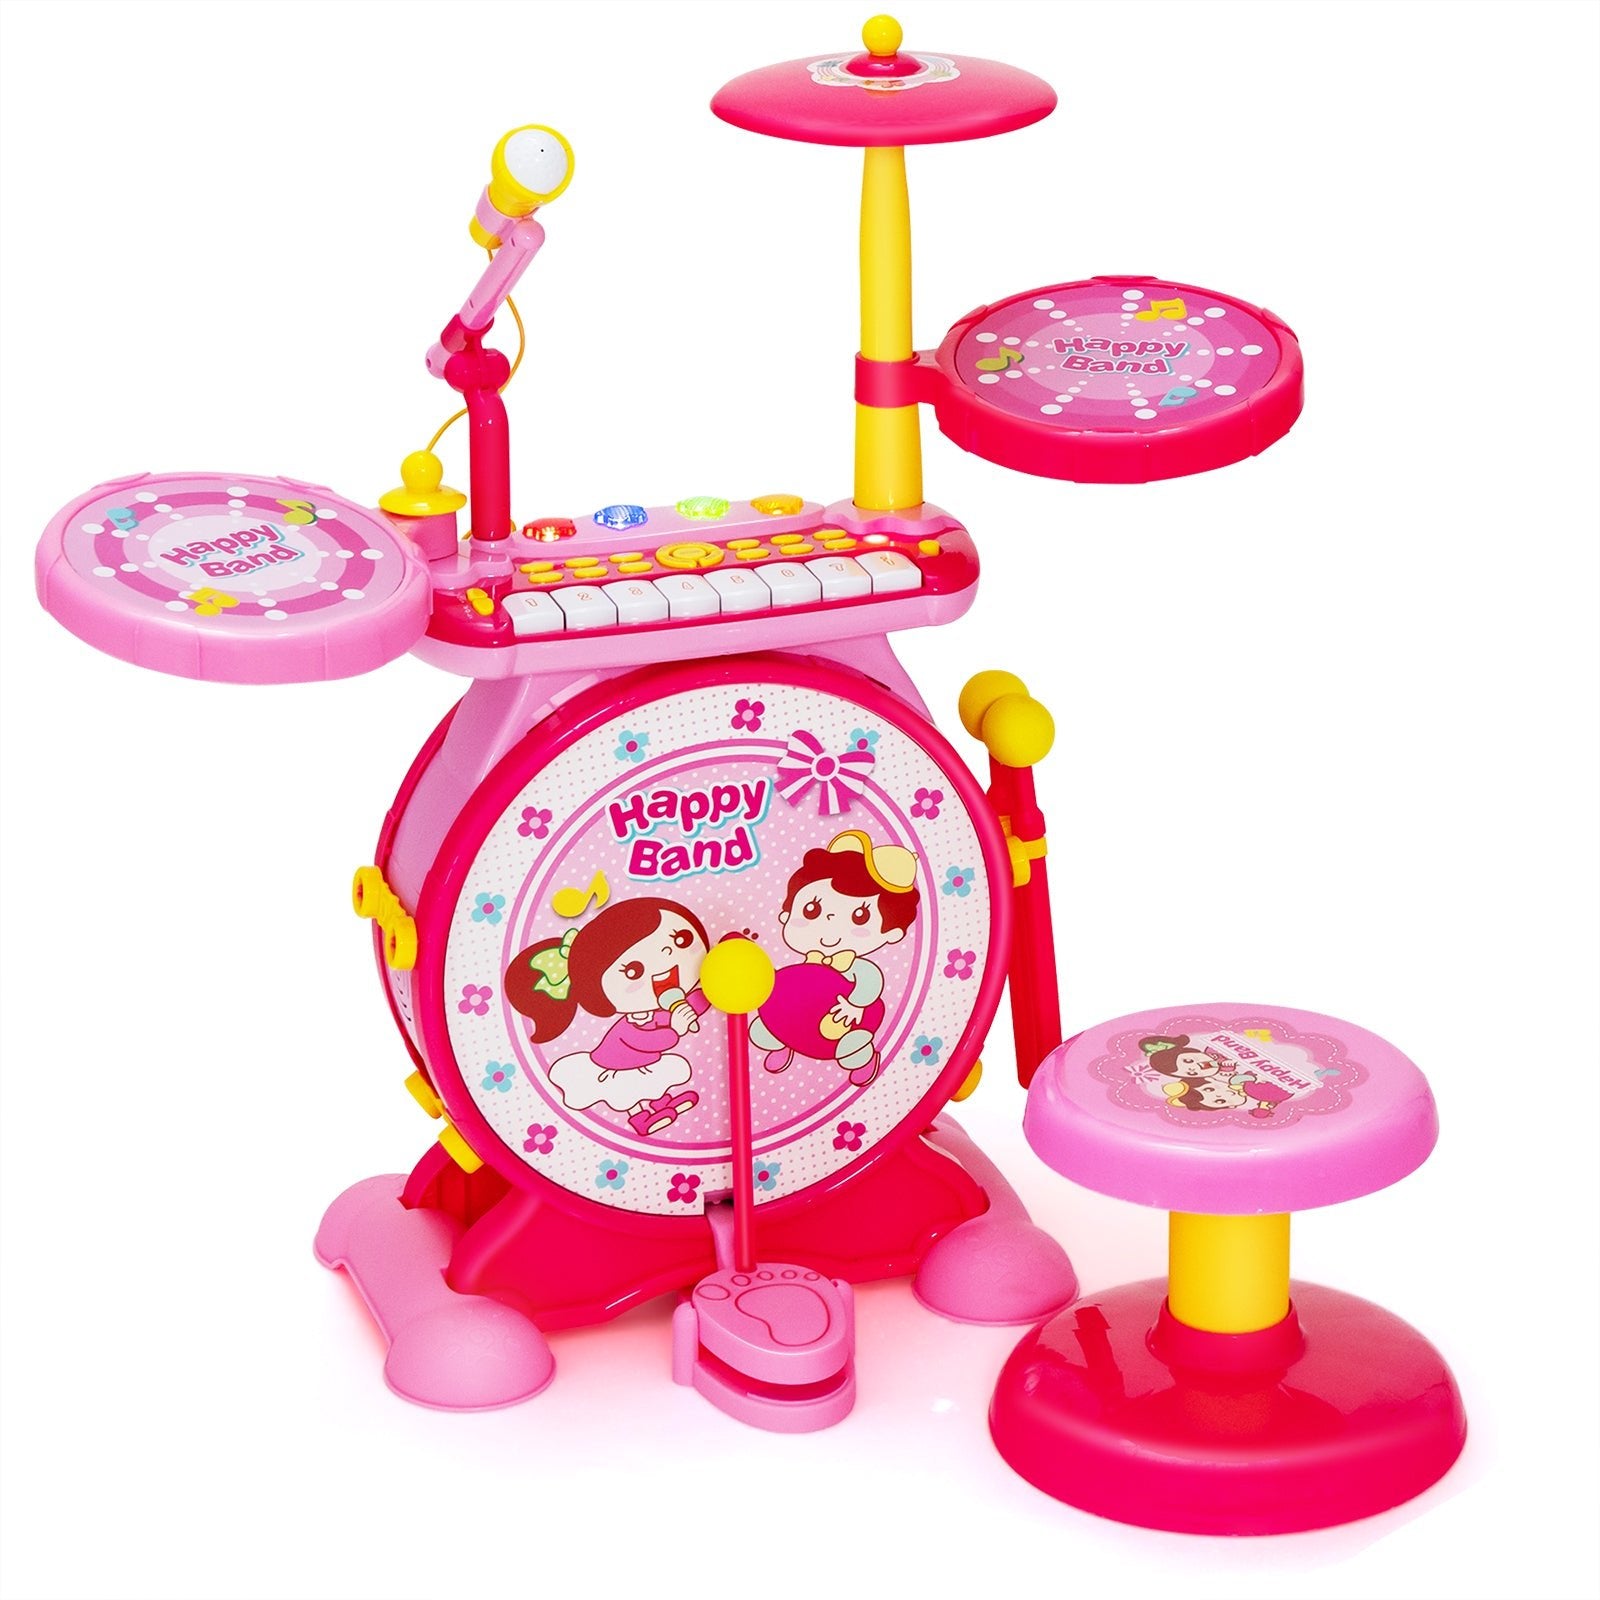 Children's Musical Adventure - 2-in-1 Electronic Drum Kit Toy with Keyboard & Mic